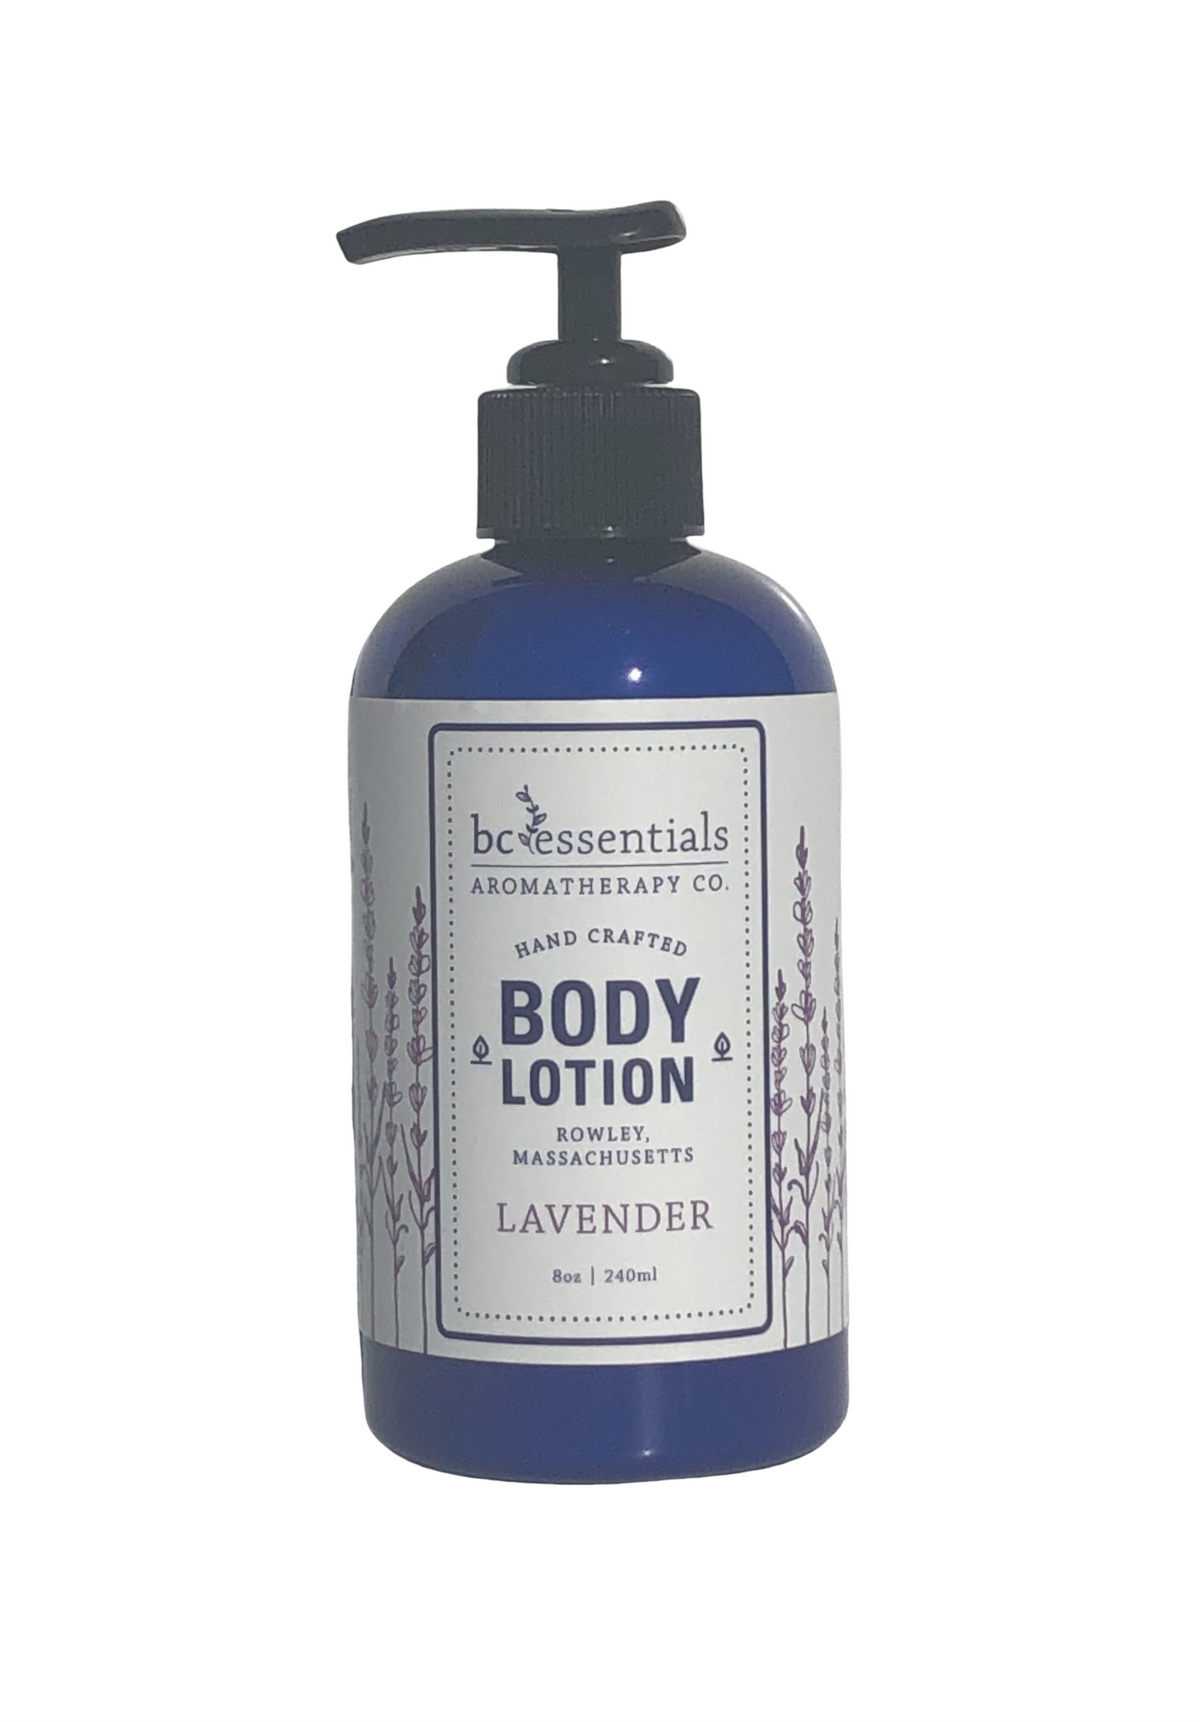 A blue bottle of BC Essentials Lavender Body Lotion - 8 oz with a pump dispenser, labeled as lavender scented with natural ingredients from BC Essentials aromatherapy co., on a white background.